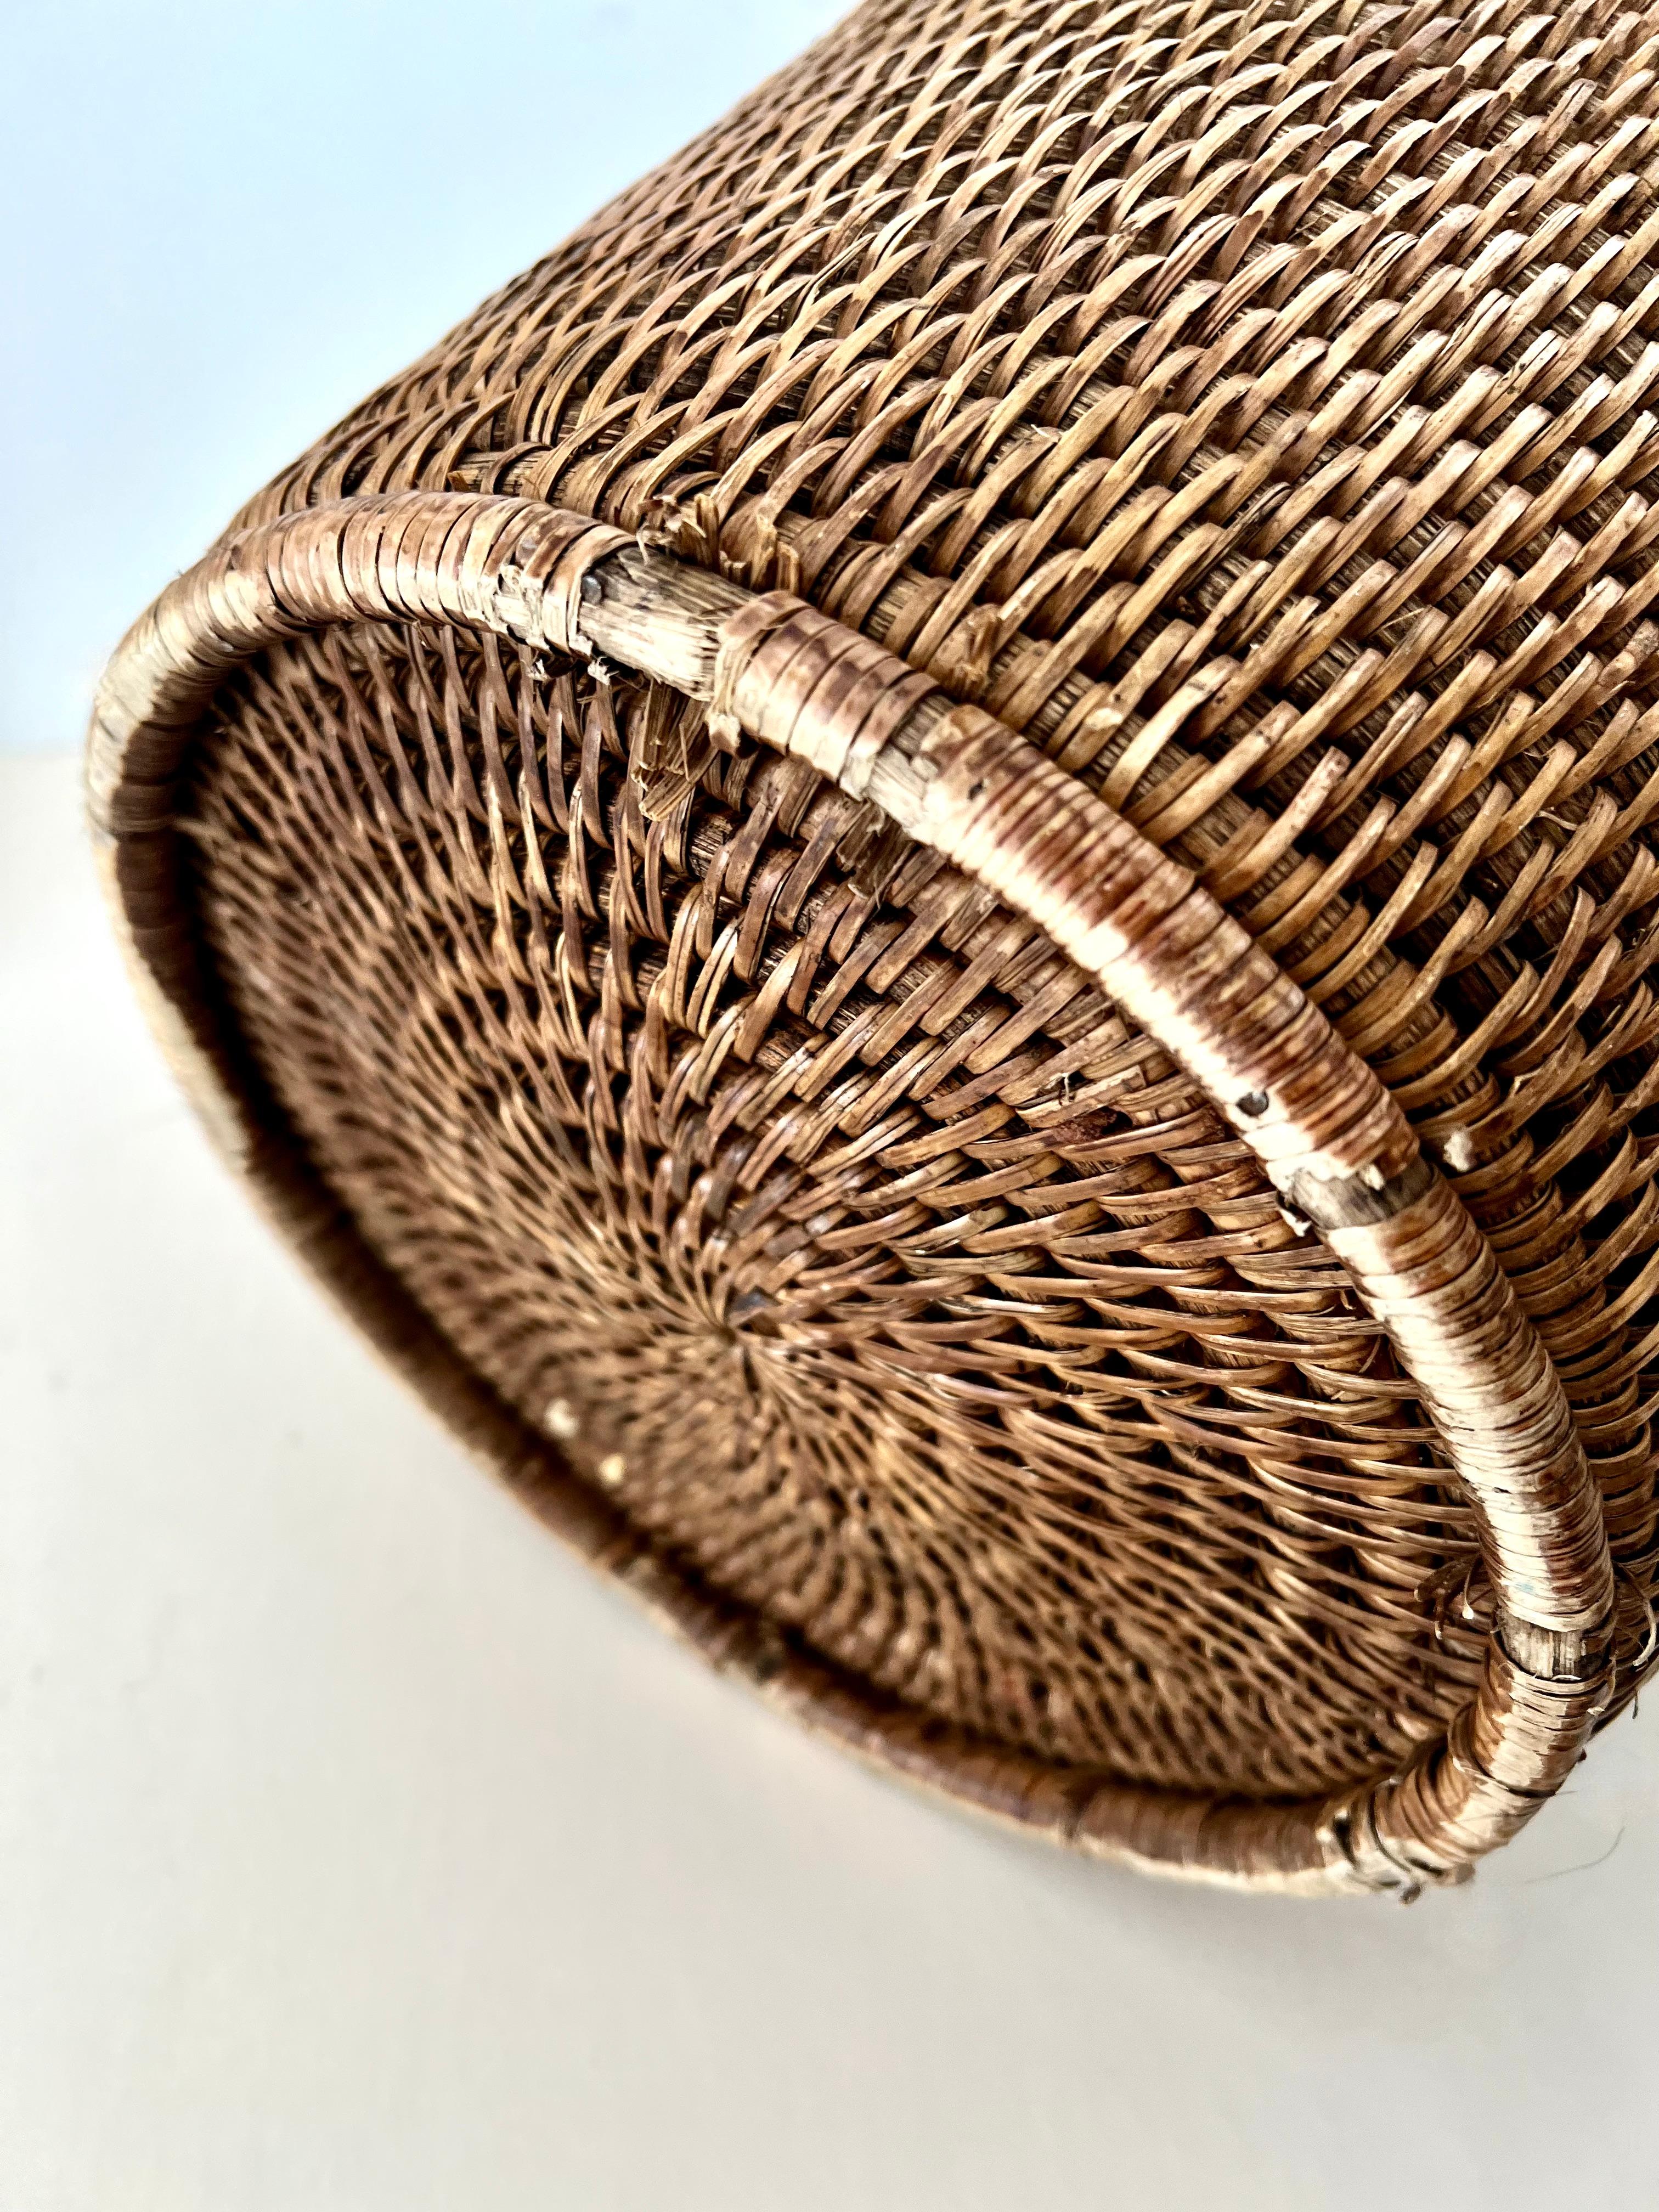 Straw Woven Rattan Waste Basket For Sale